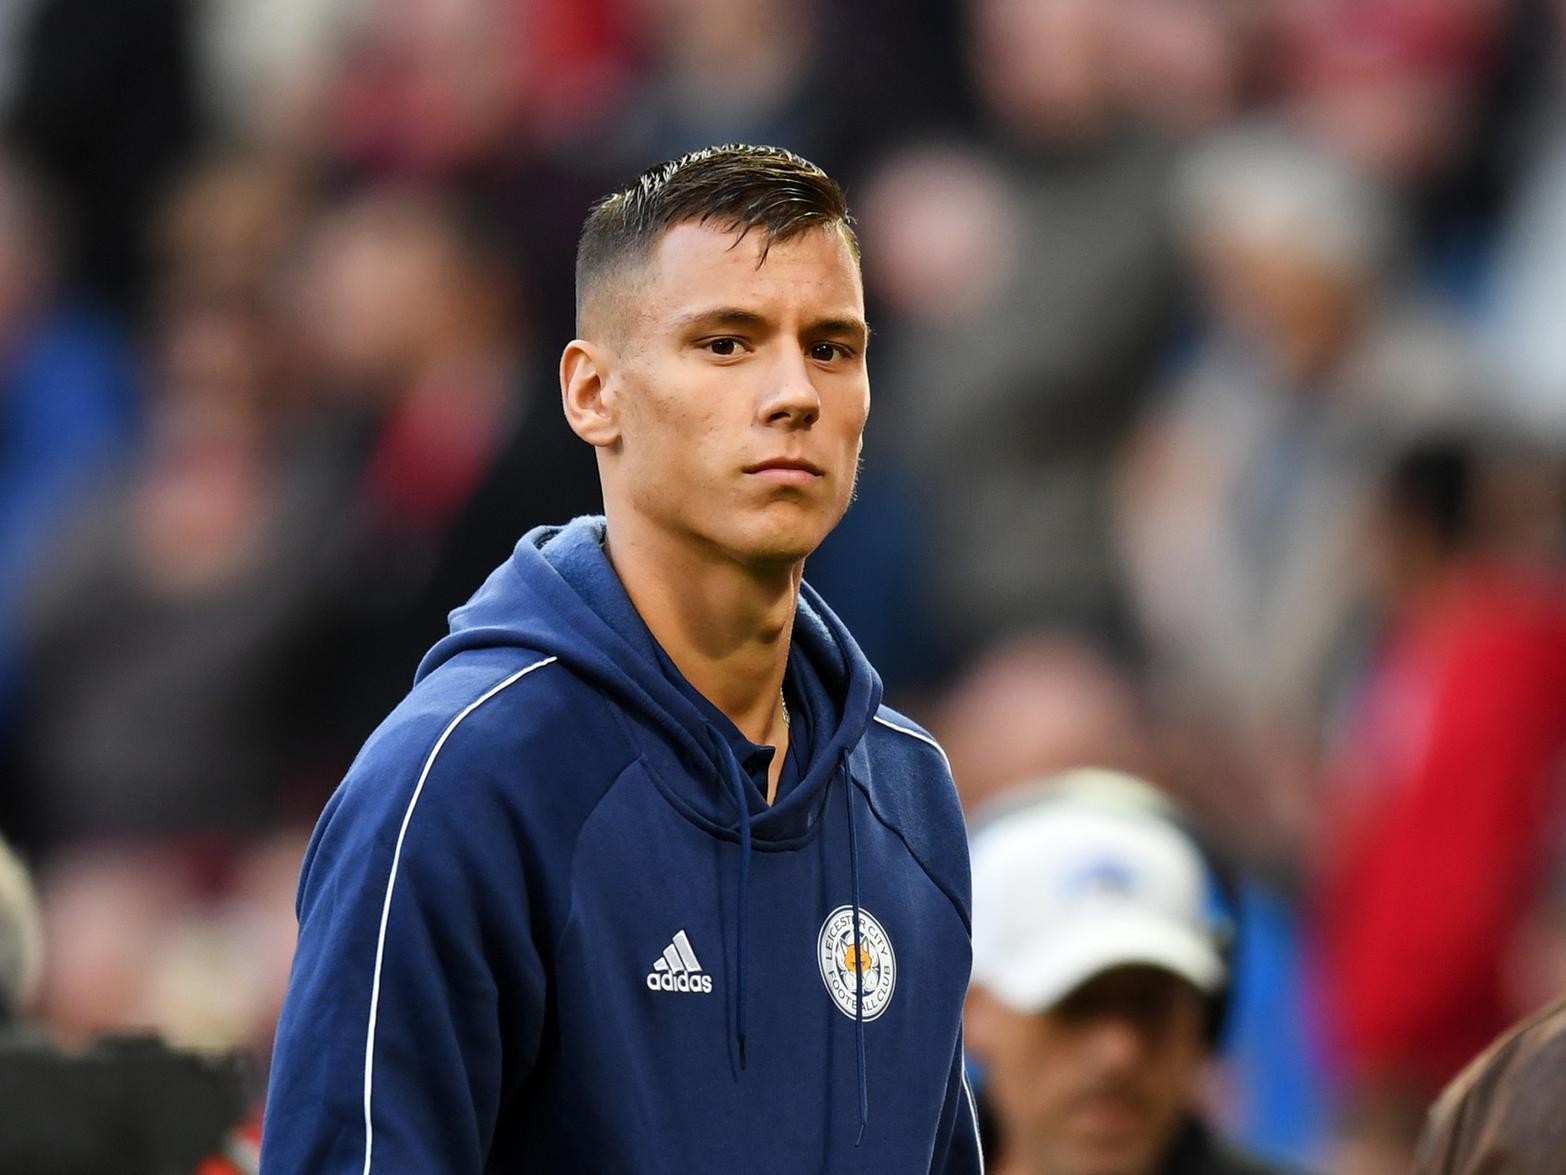 Derby County are preparing to launch a move for Leicester City defender Filip Benkovic on loan, as they look to reignite their push for promotion in the second half of the season. (Daily Telegraph)